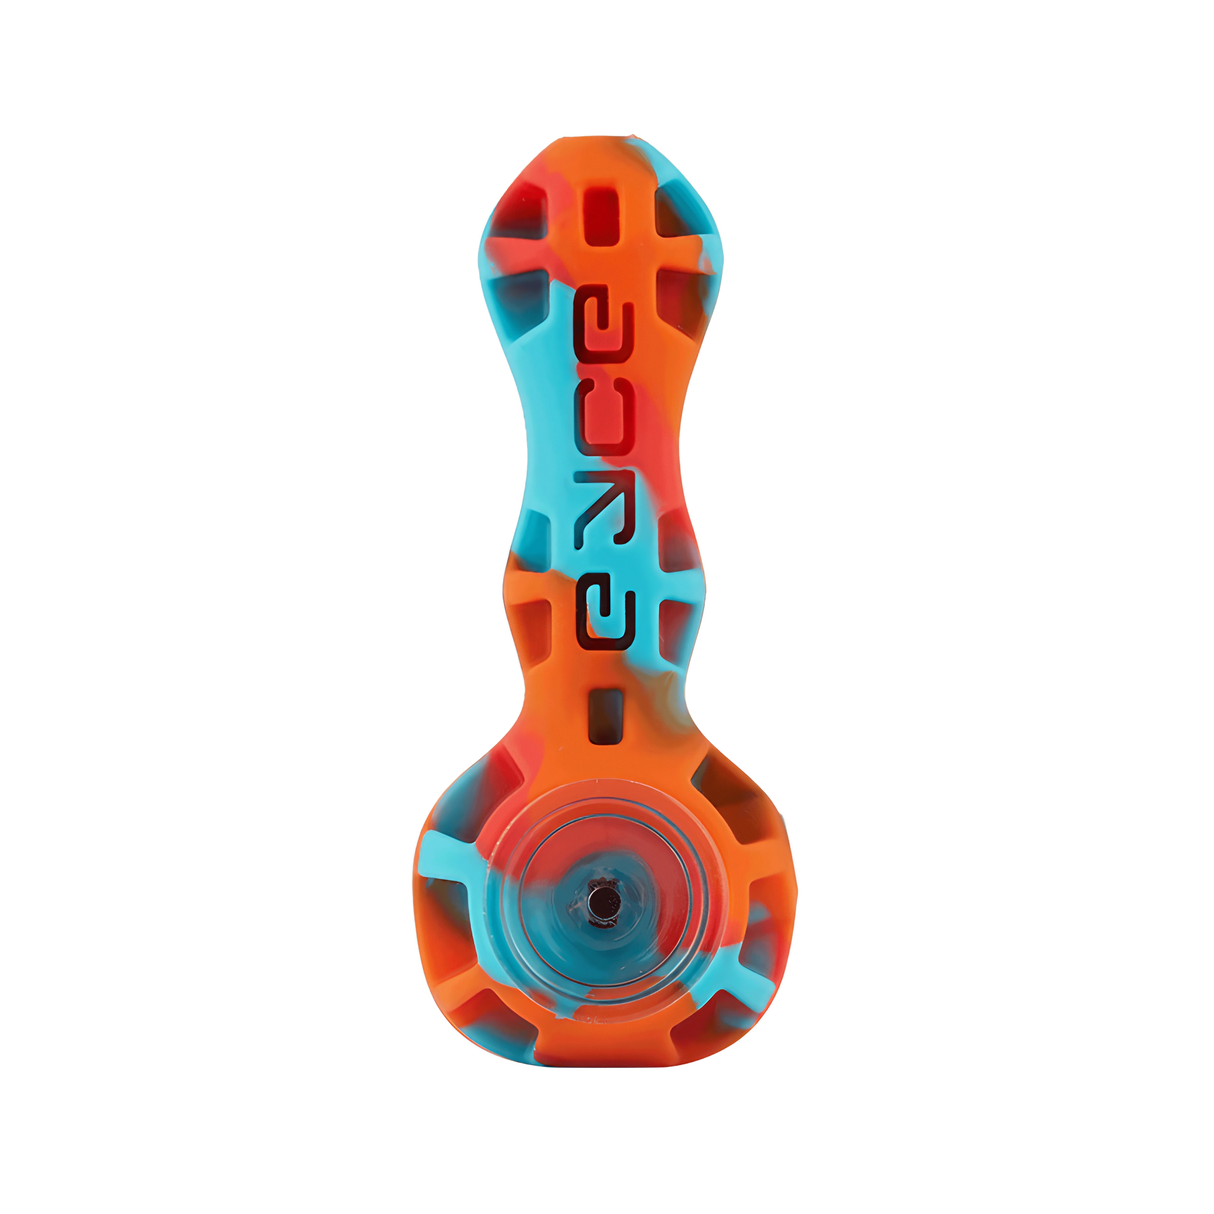 EYCE Spoon - 4" Silicone Hand Pipe in Vibrant Orange and Blue - Front View